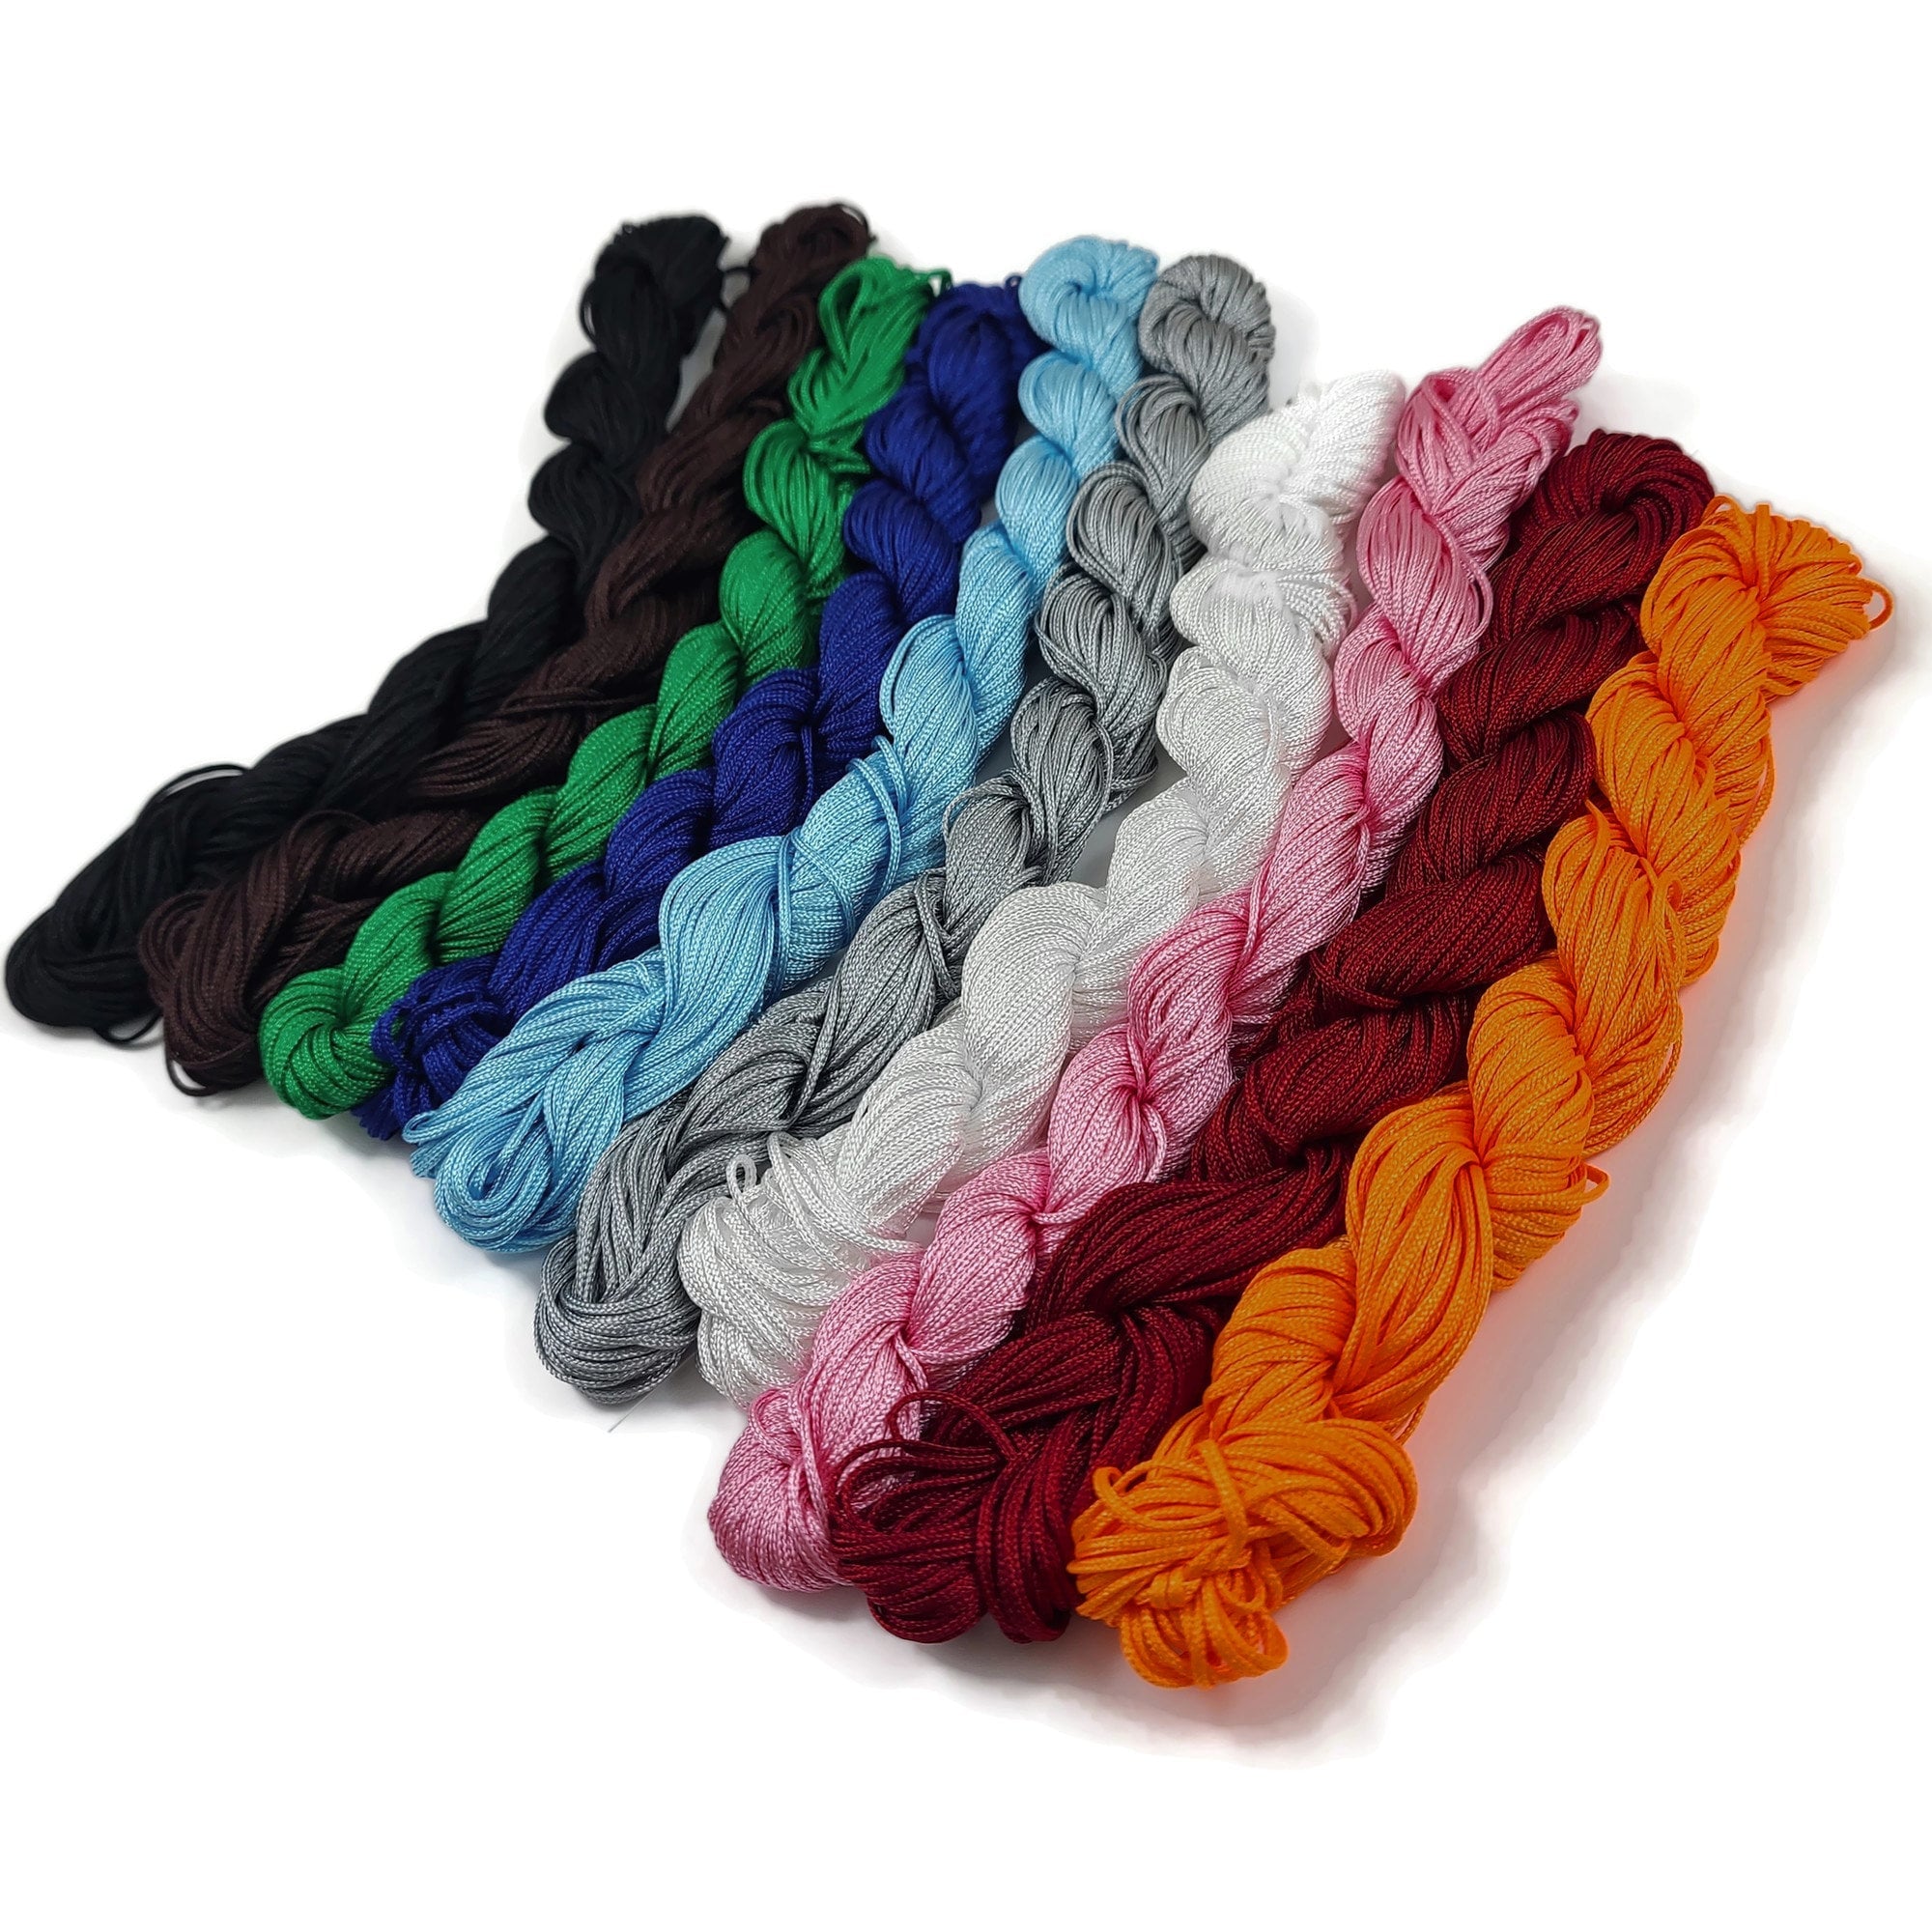 2mm nylon cord - 10 meters / 32 ft - Knotting string, Macrame thread, Jewelry making supplies